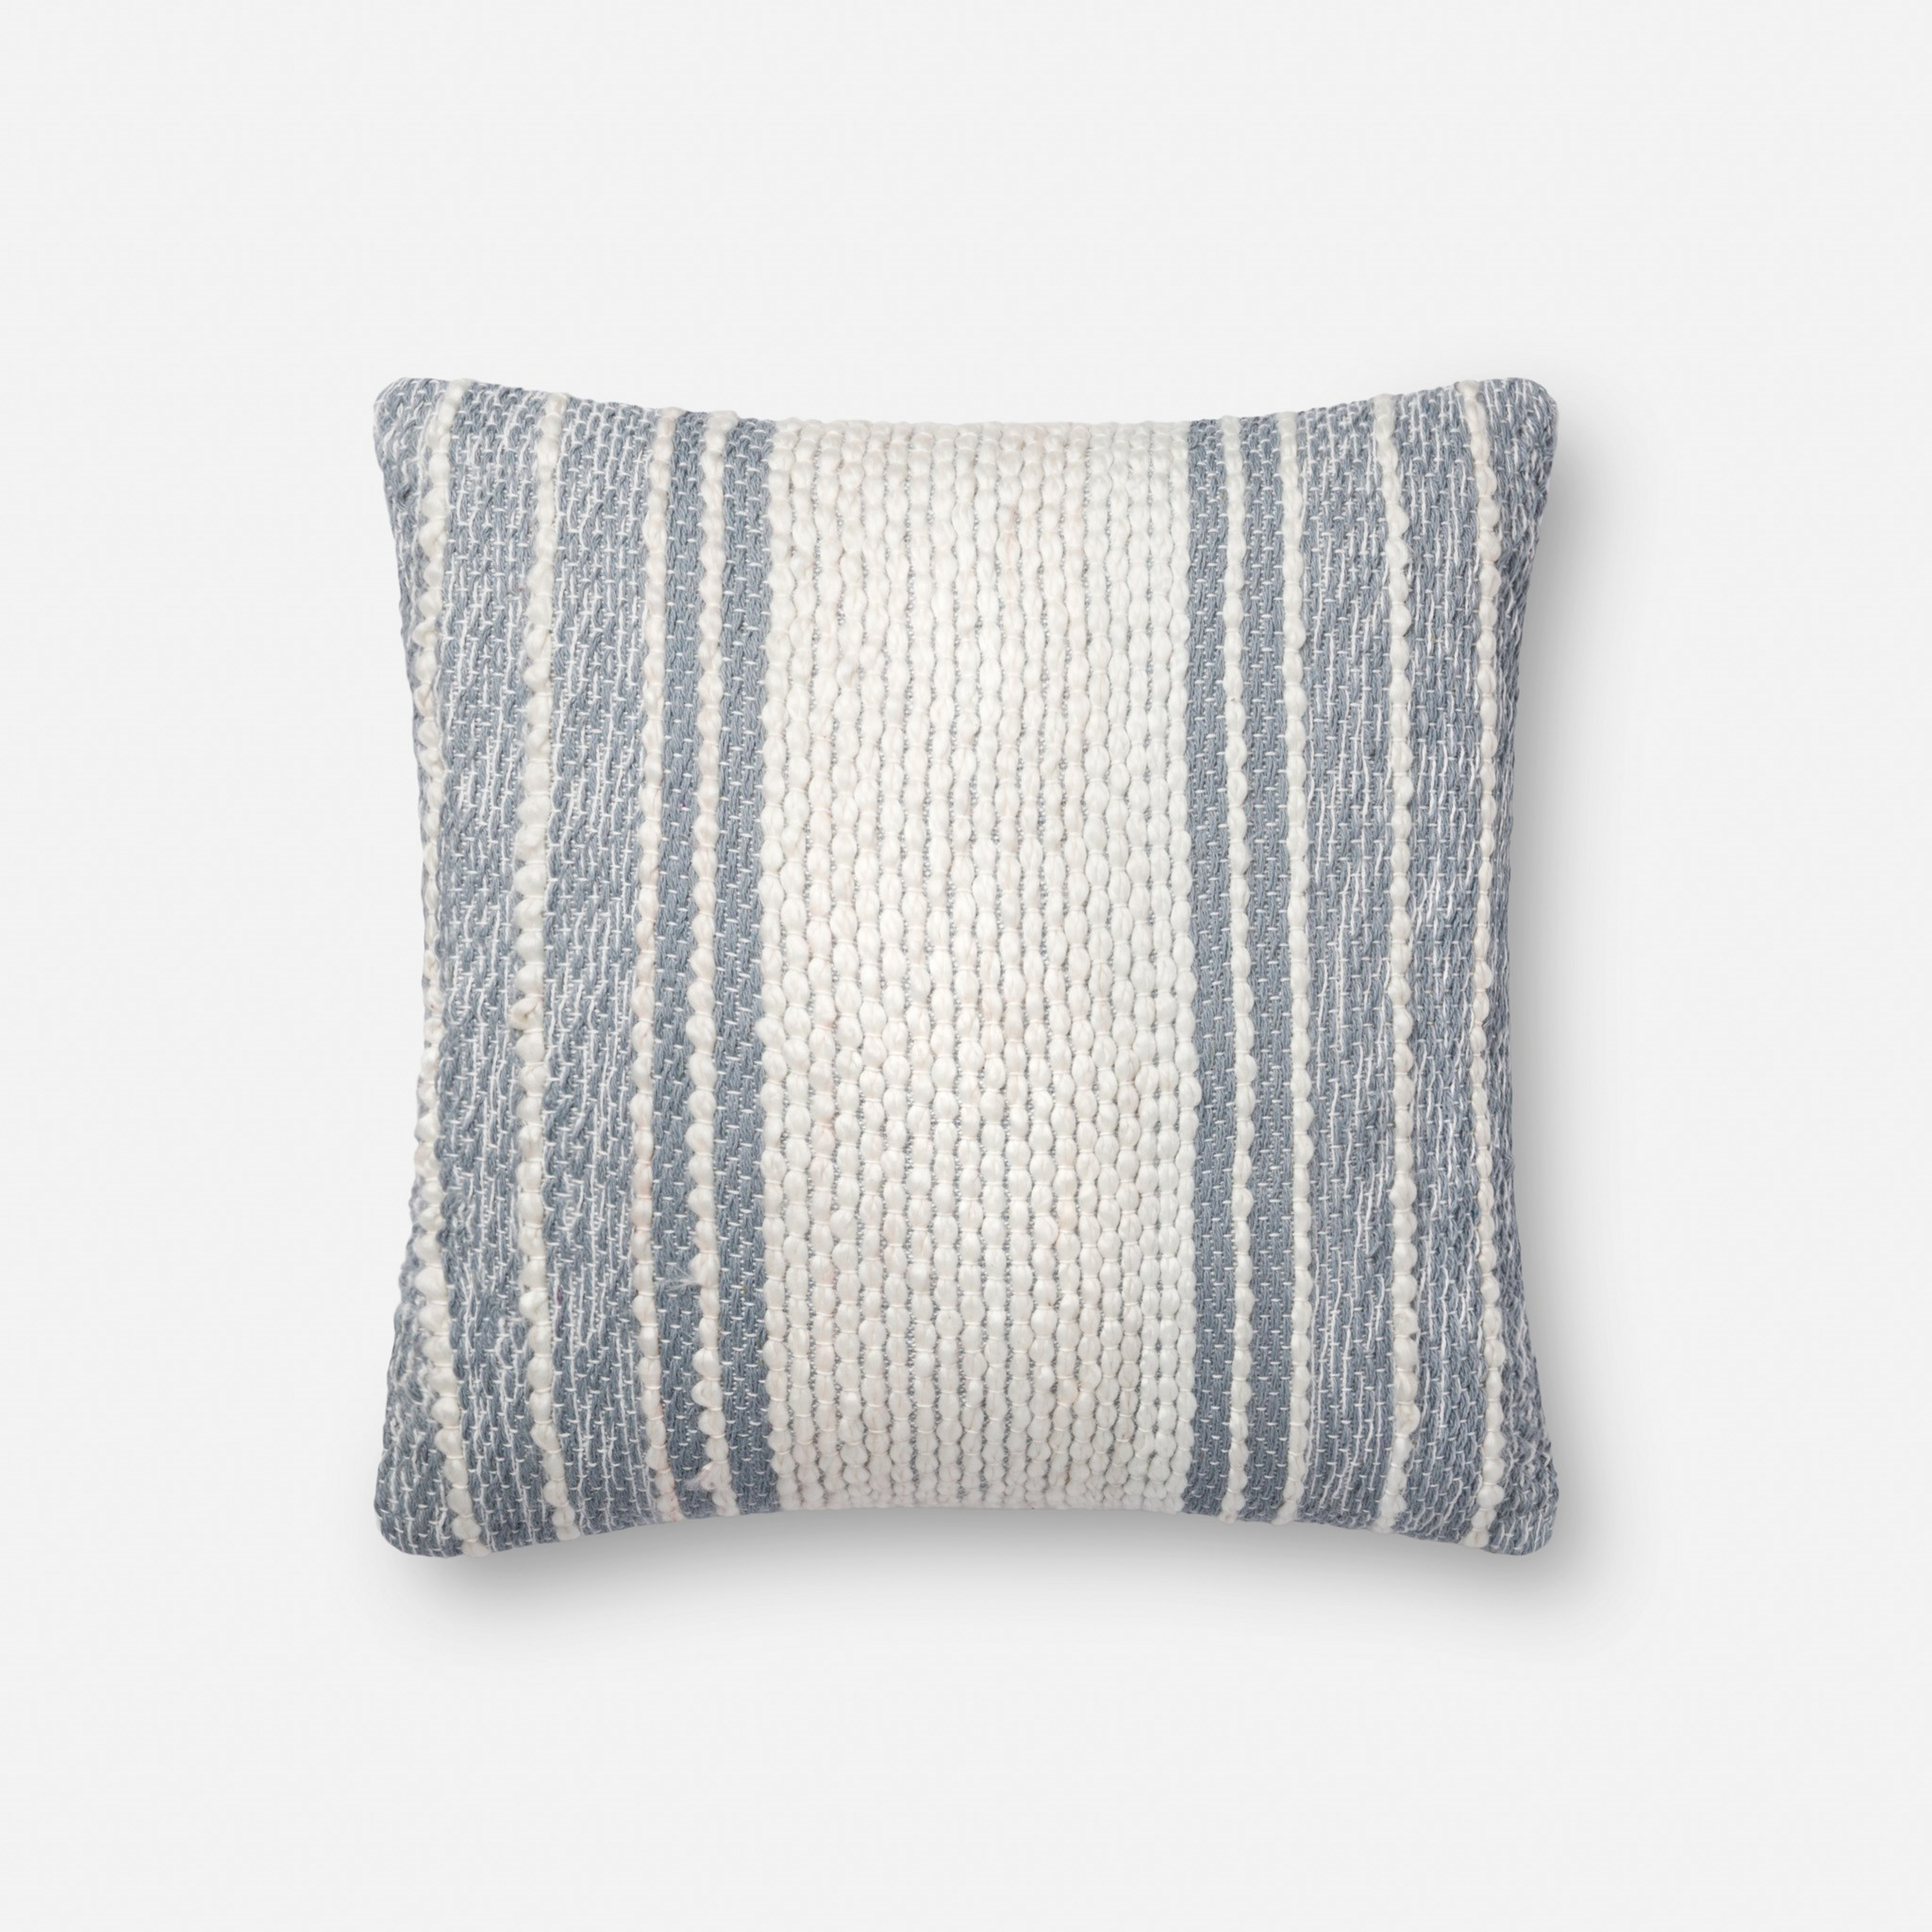 Magnolia Home by Joanna Gaines Jewel Square Throw Pillow, Blue & Ivory, 18" x 18" - Loloi Rugs